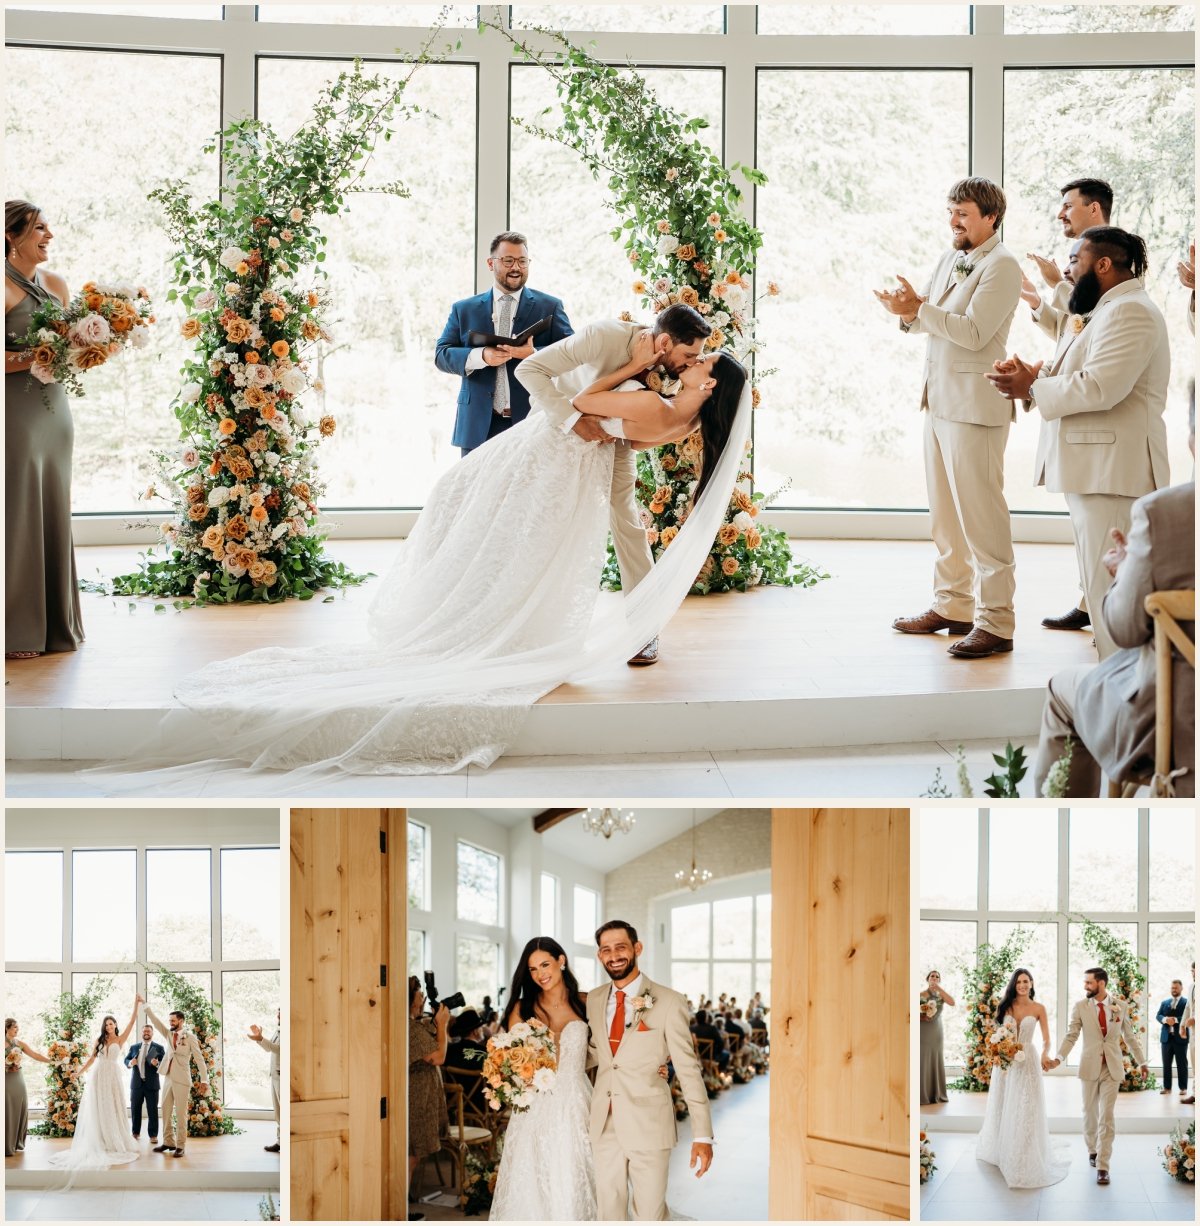 Newlyweds at The Preserve at Canyon Lake Ceremony | Lauren Crumpler Photography | Texas Wedding Photographer